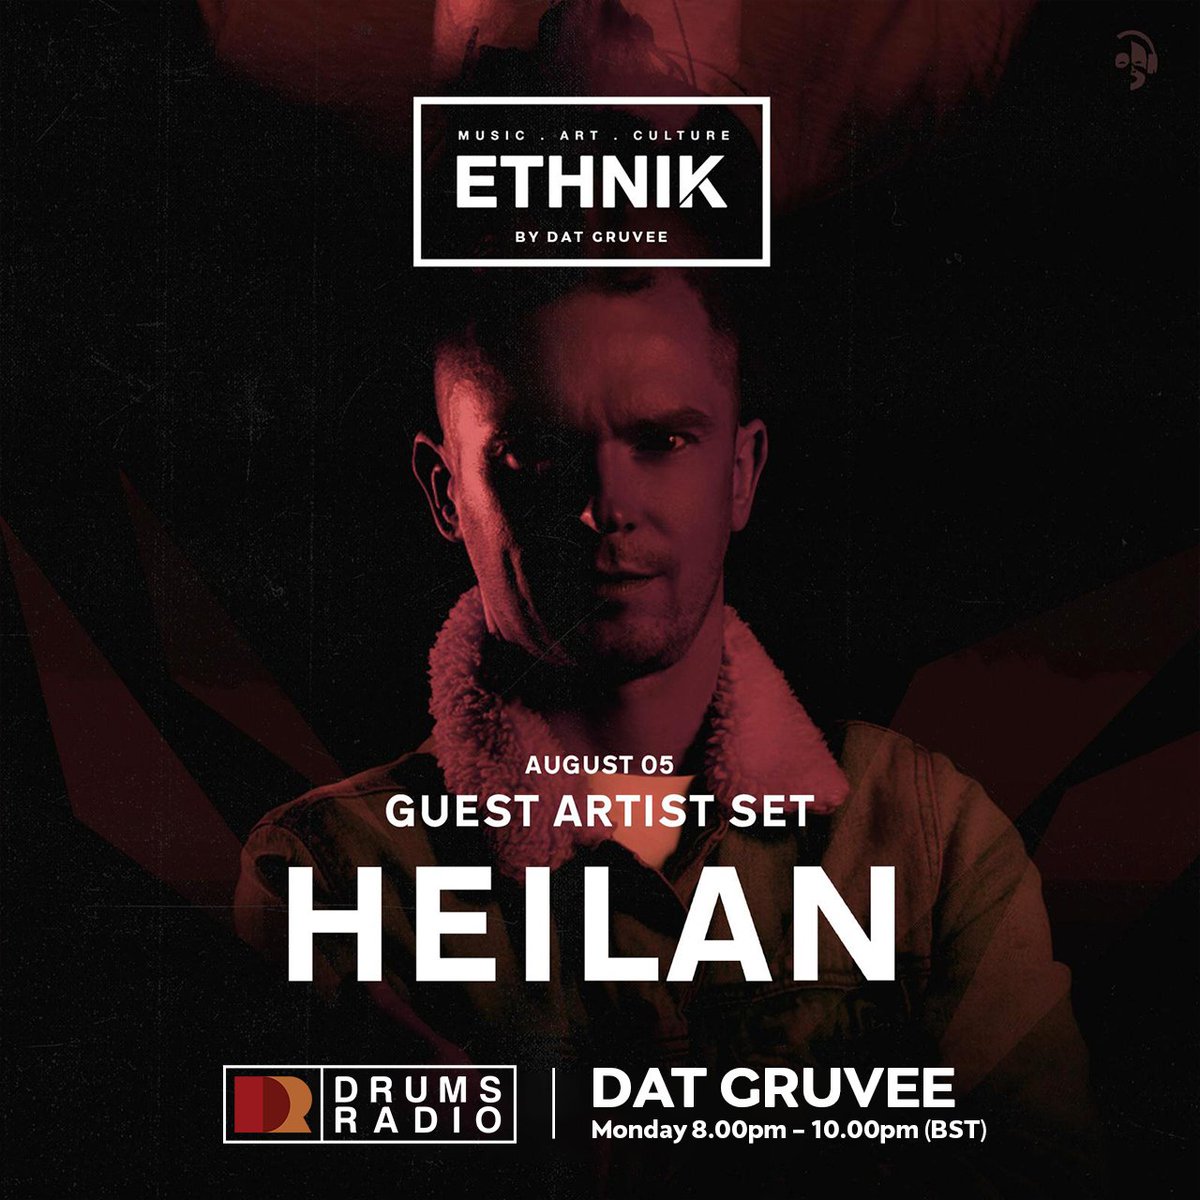 #MondayMayhem...

@DATGRUVEE - Ethnik ft @DJ_Heilan guest mix...it's a culture adness 

8pm BST | 9pm CAT

DL the app / Tune in
drumsradio.com 

#WeAreGlobal
#Afrohouse Raw & Unfiltered
#TheSoundOfAfroHouse
#housemusic